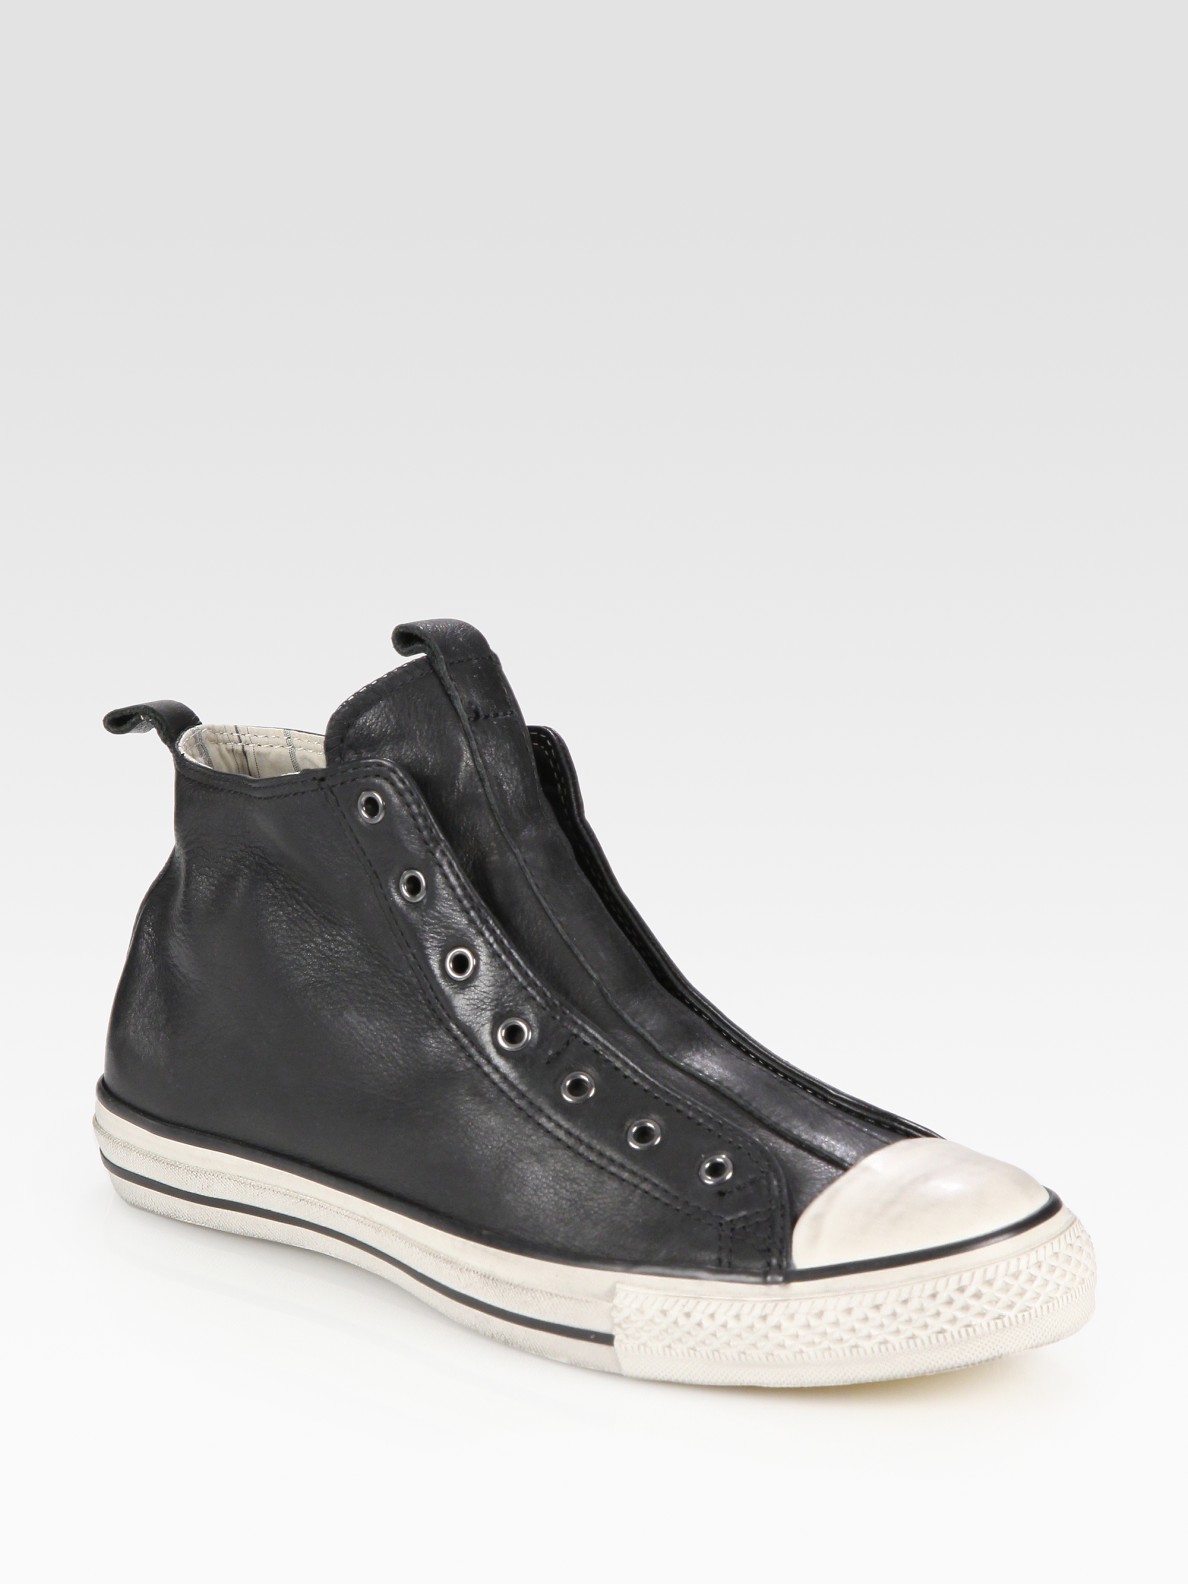 Converse John Varvatos Laceless Leather High Top Sneakers in Black for Men  - Lyst